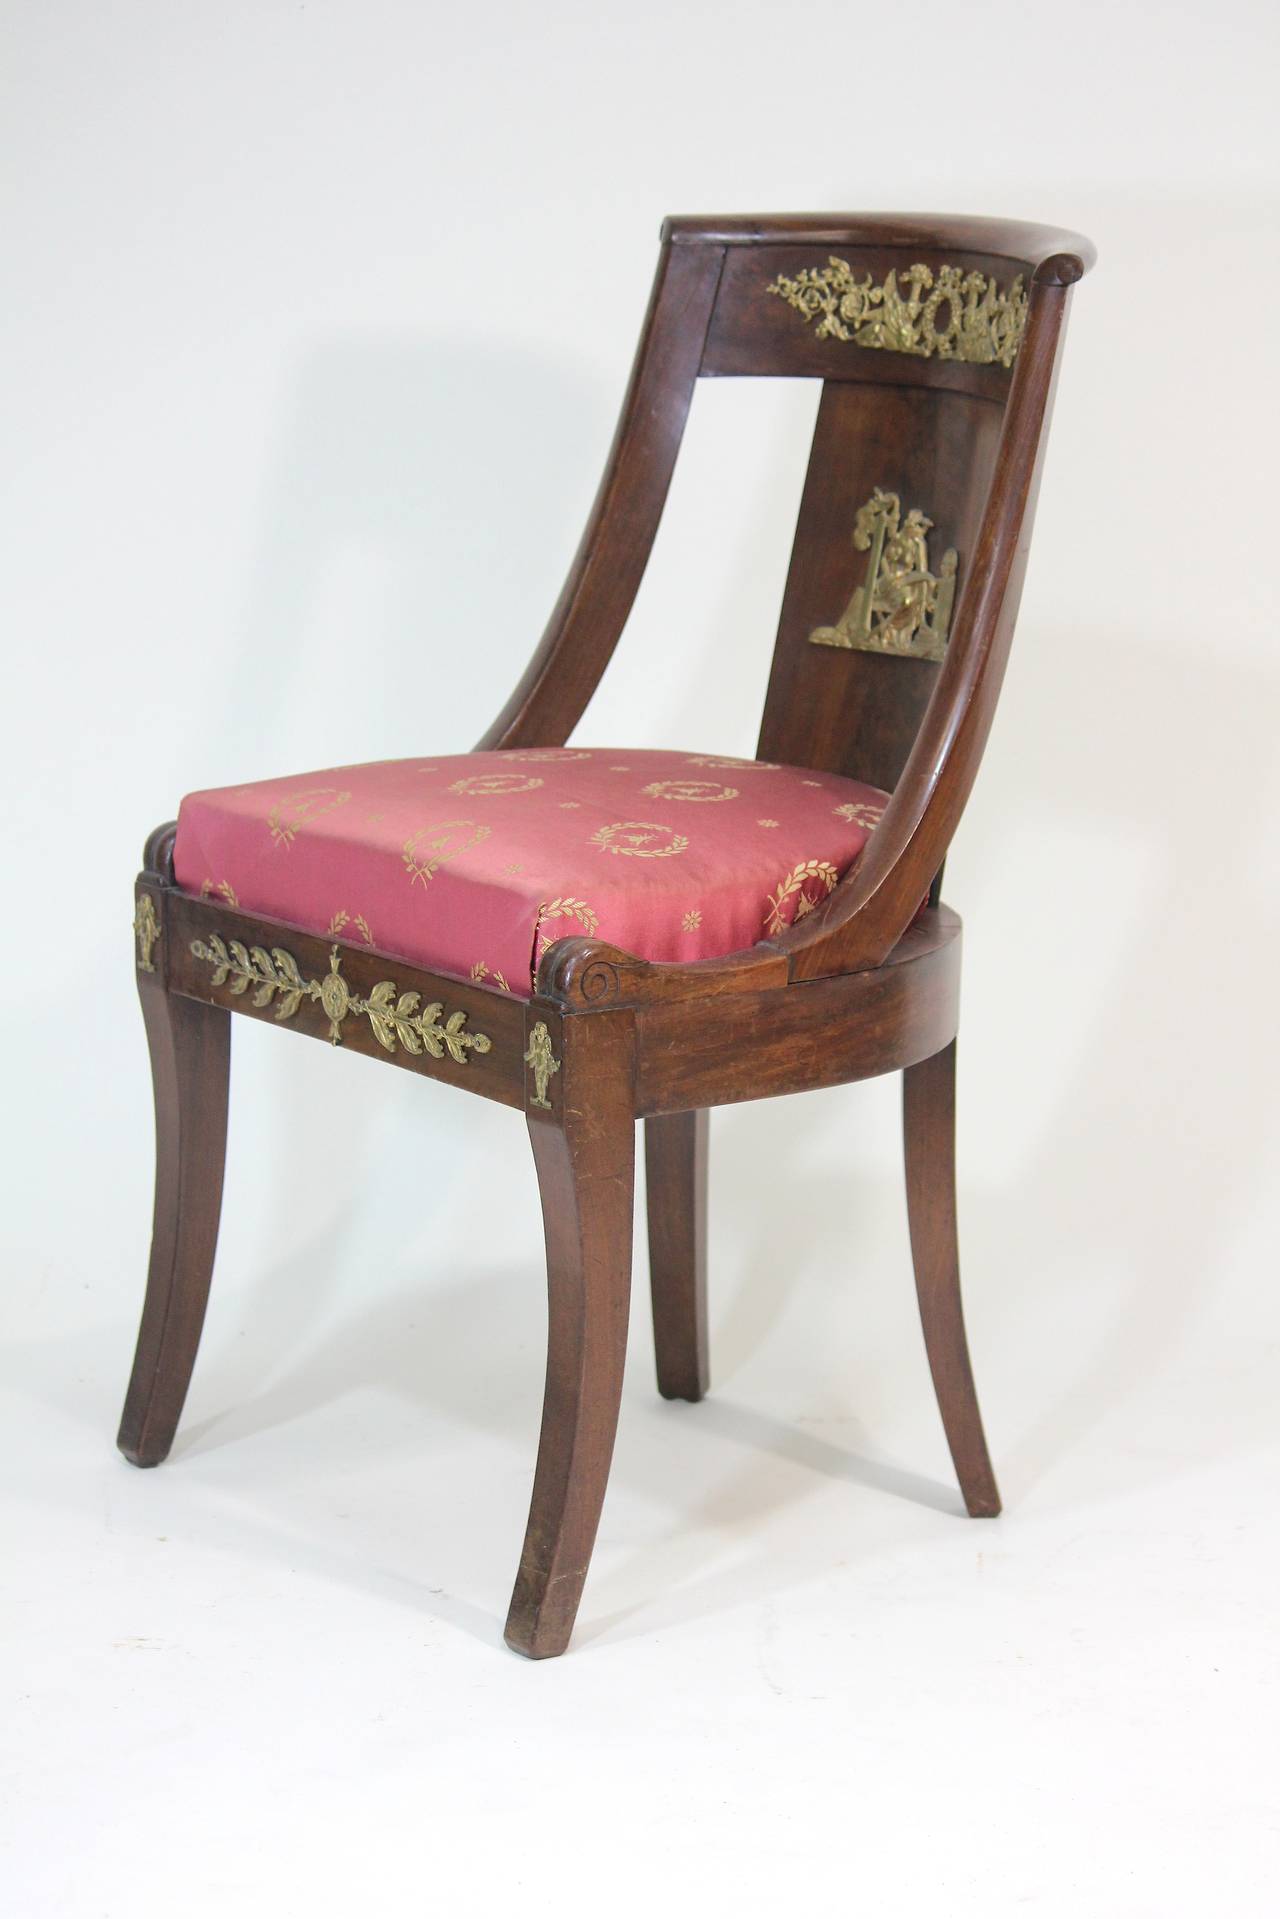 Gilt Period French Empire Chairs, circa 1815 with Famed Provenance For Sale